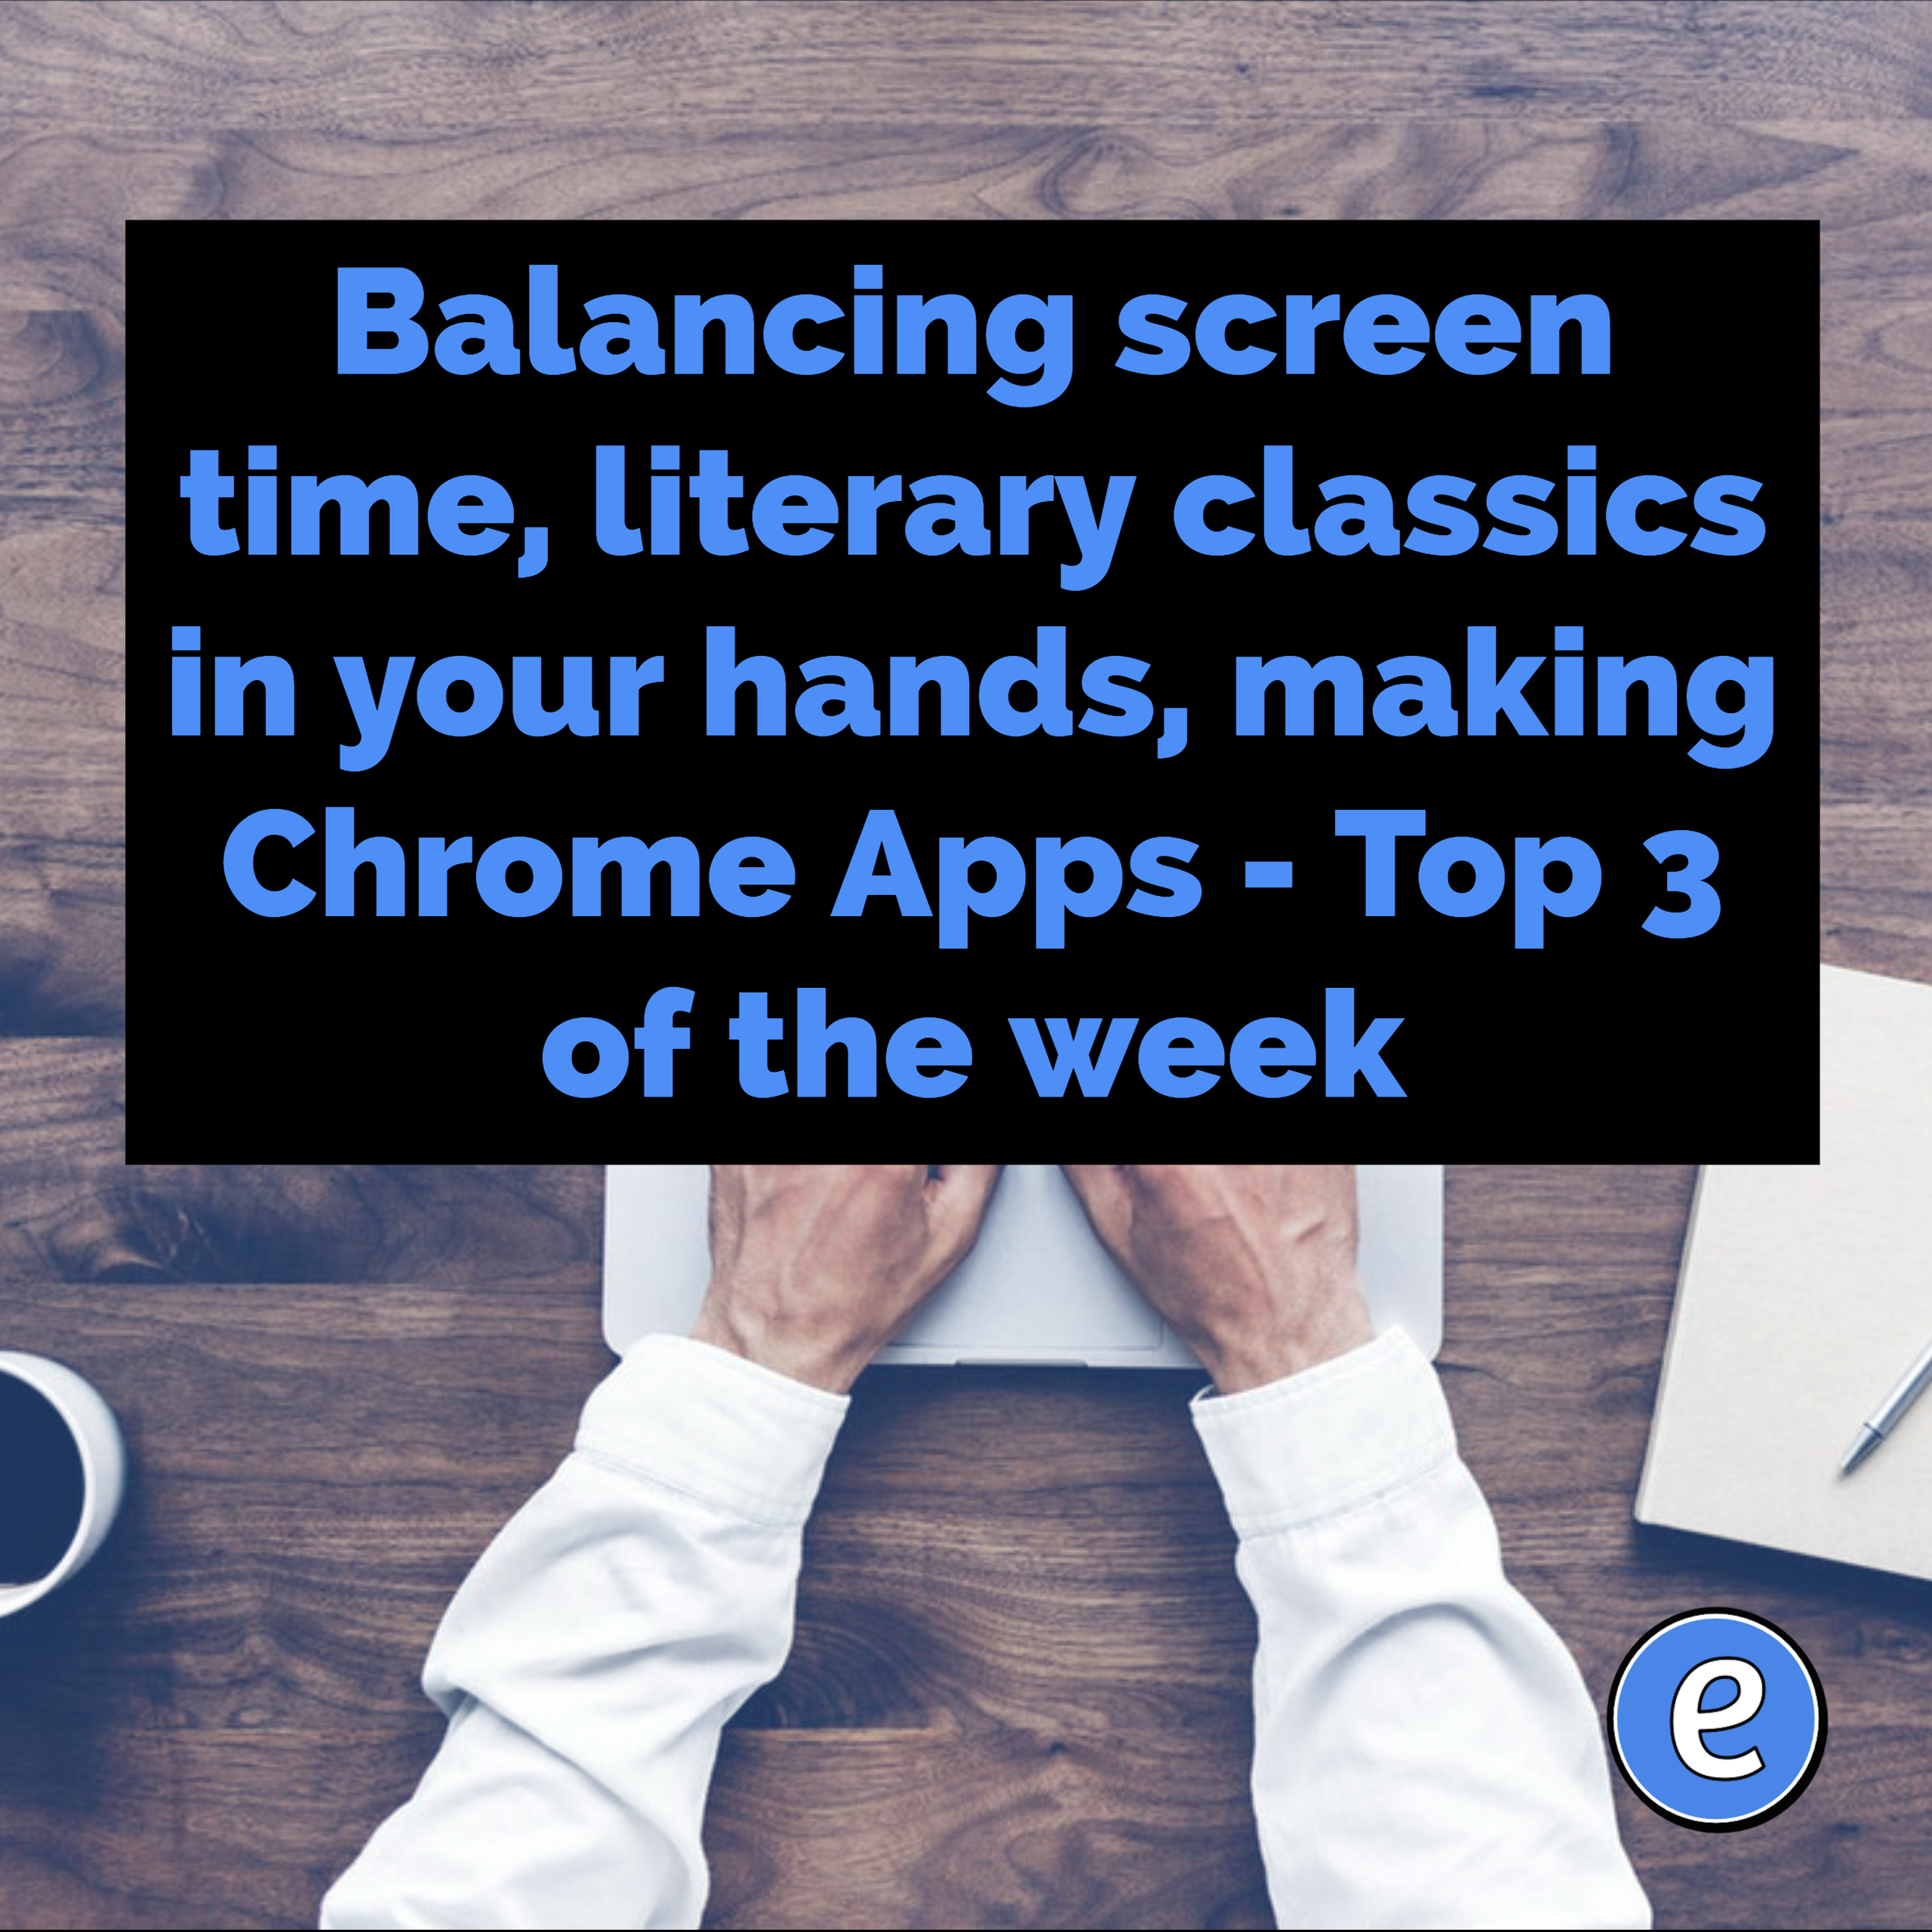 Balancing screen time, literary classics in your hands, making Chrome Apps – Top 3 of the week